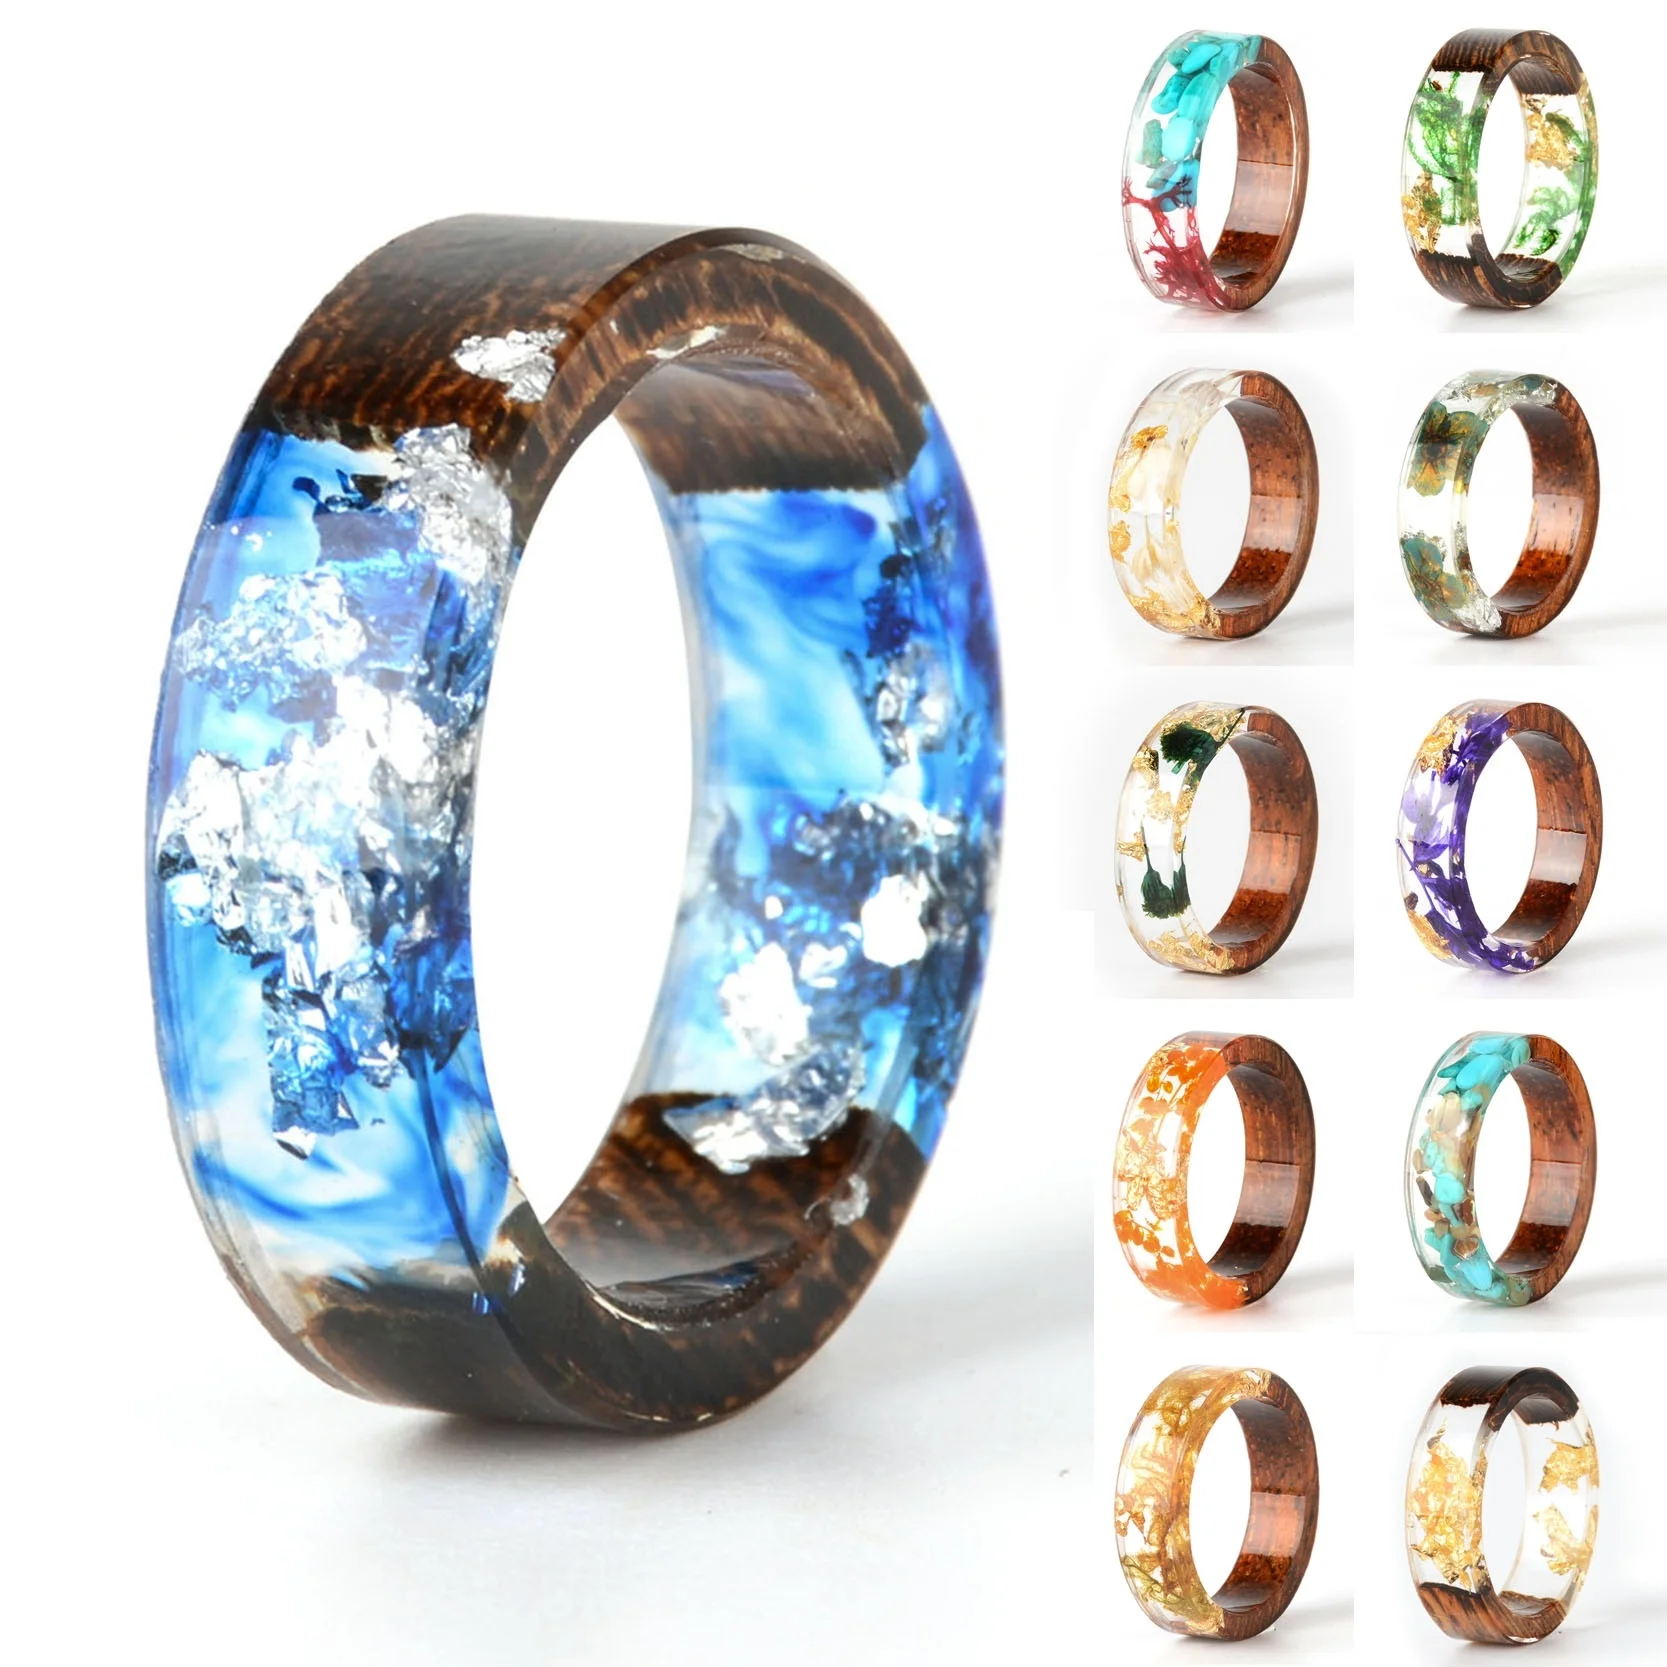 Handmade Diy Romantic Dried Real Flower Wood Resin Ring Gold Foil Inside  Ring Women Wedding Party Ring Gifts For Lover - Rings - AliExpress